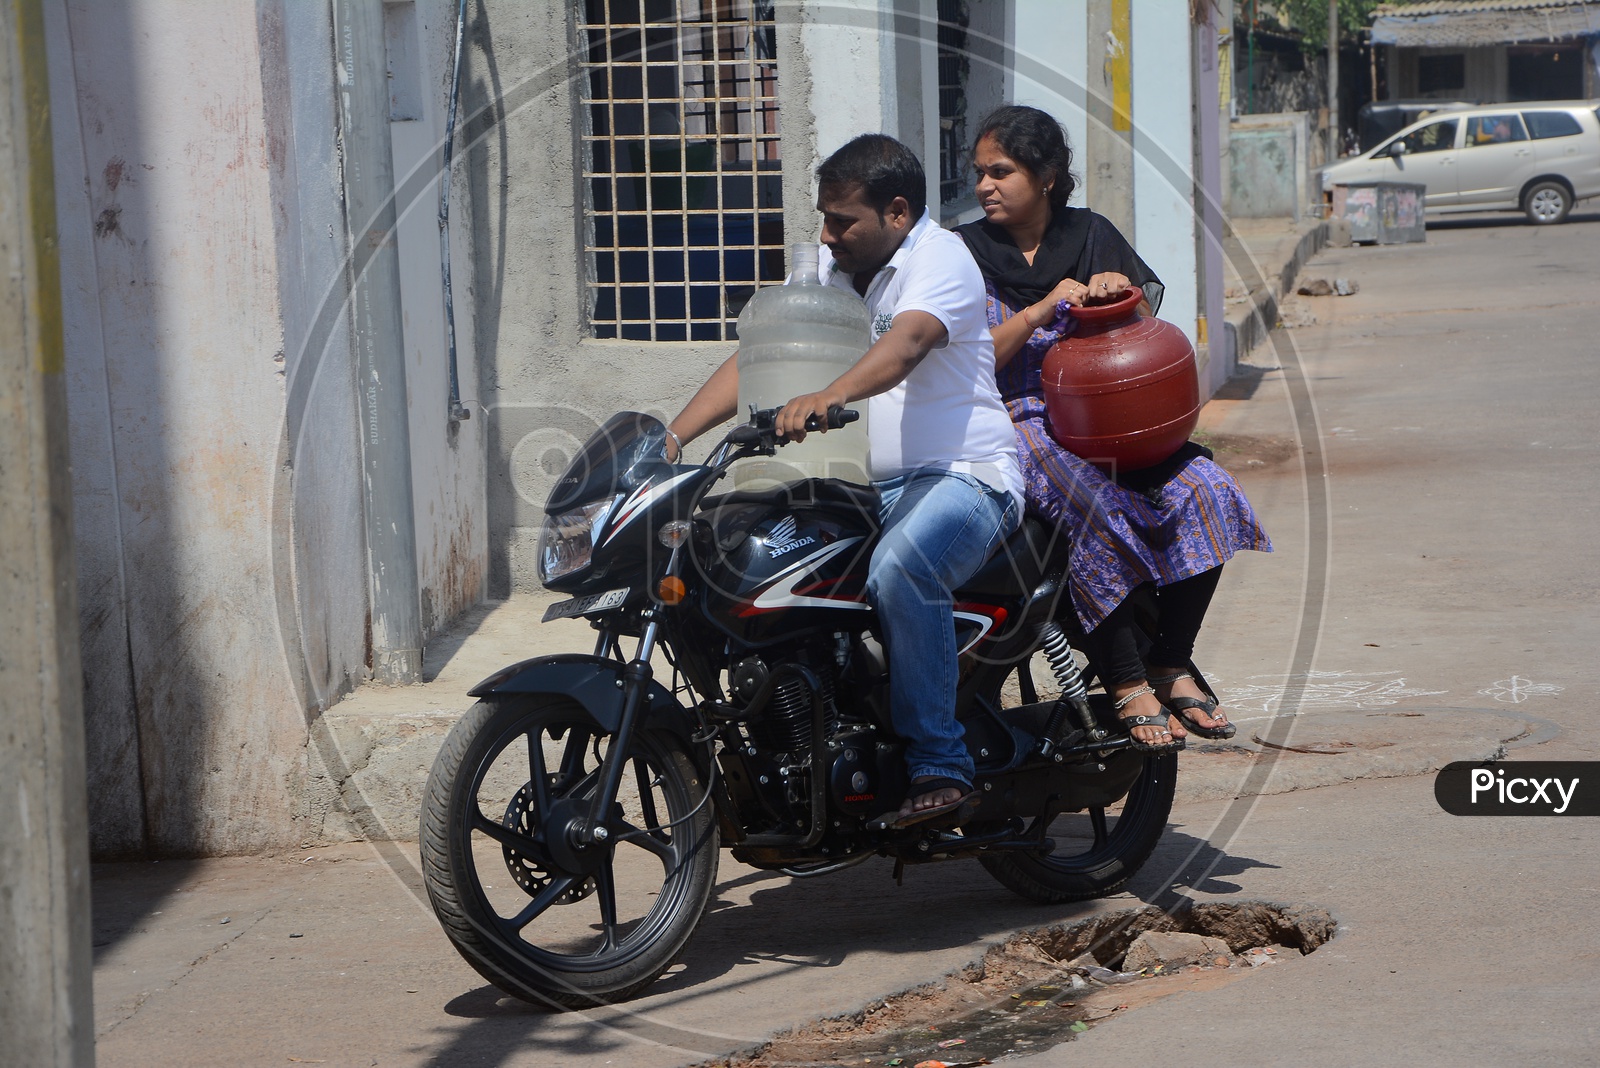 A Couple Carrying Drinking Water Filled Vessels In a Bike